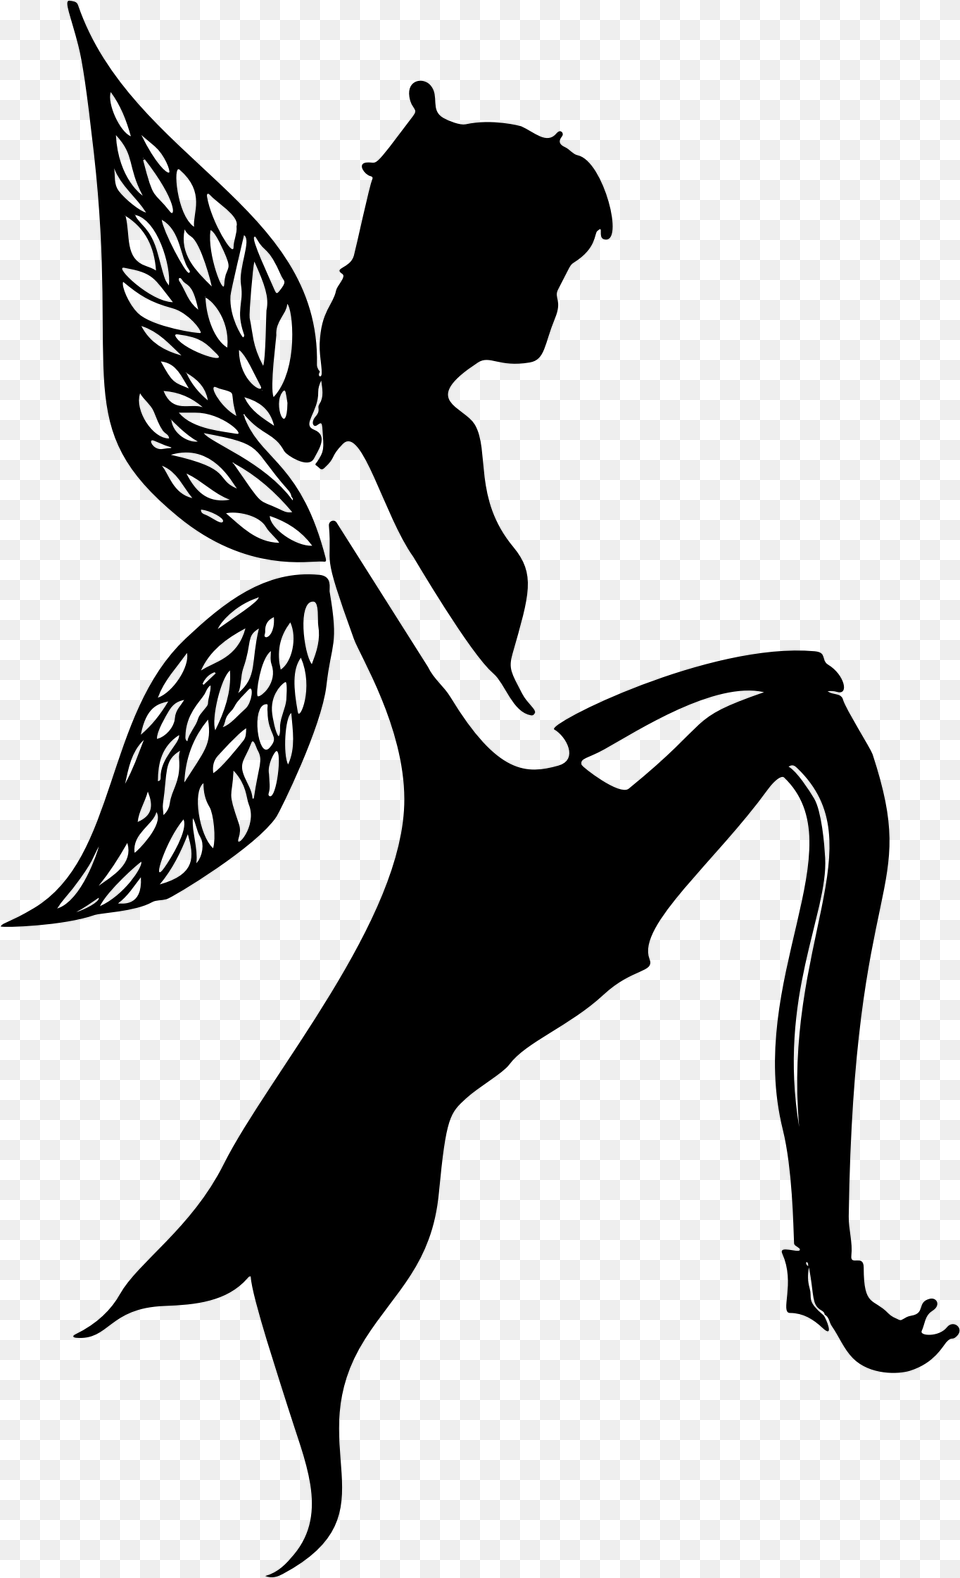 This Icons Design Of Fairy In Sitting Position, Gray Png Image